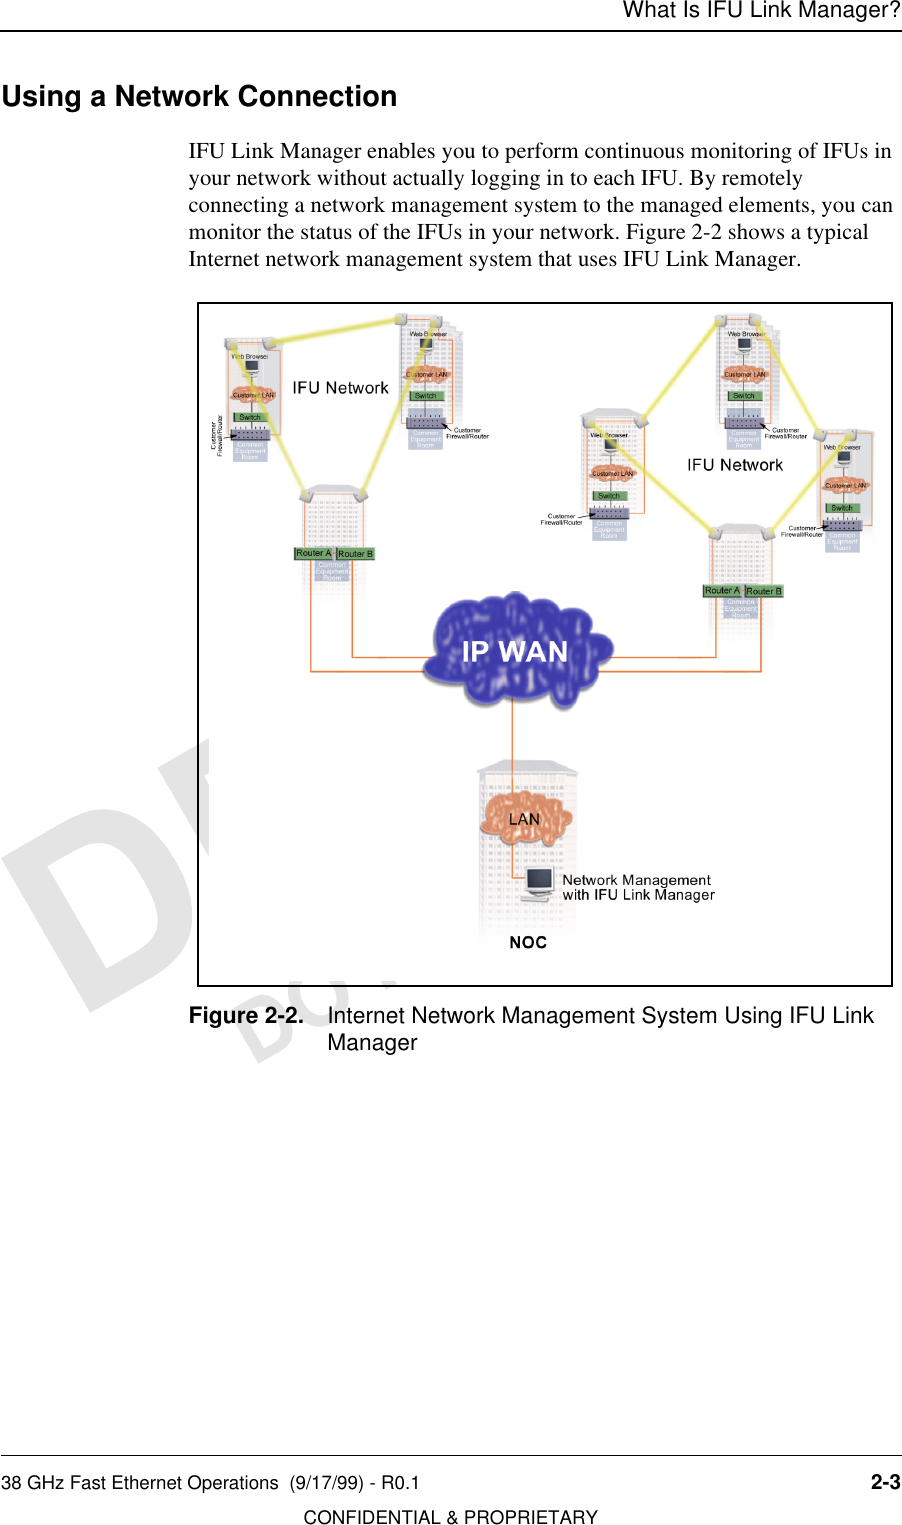 What Is IFU Link Manager?38 GHz Fast Ethernet Operations  (9/17/99) - R0.1 2-3CONFIDENTIAL &amp; PROPRIETARYDO NOT COPYUsing a Network ConnectionIFU Link Manager enables you to perform continuous monitoring of IFUs in your network without actually logging in to each IFU. By remotely connecting a network management system to the managed elements, you can monitor the status of the IFUs in your network. Figure 2-2 shows a typical Internet network management system that uses IFU Link Manager.Figure 2-2. Internet Network Management System Using IFU Link Manager